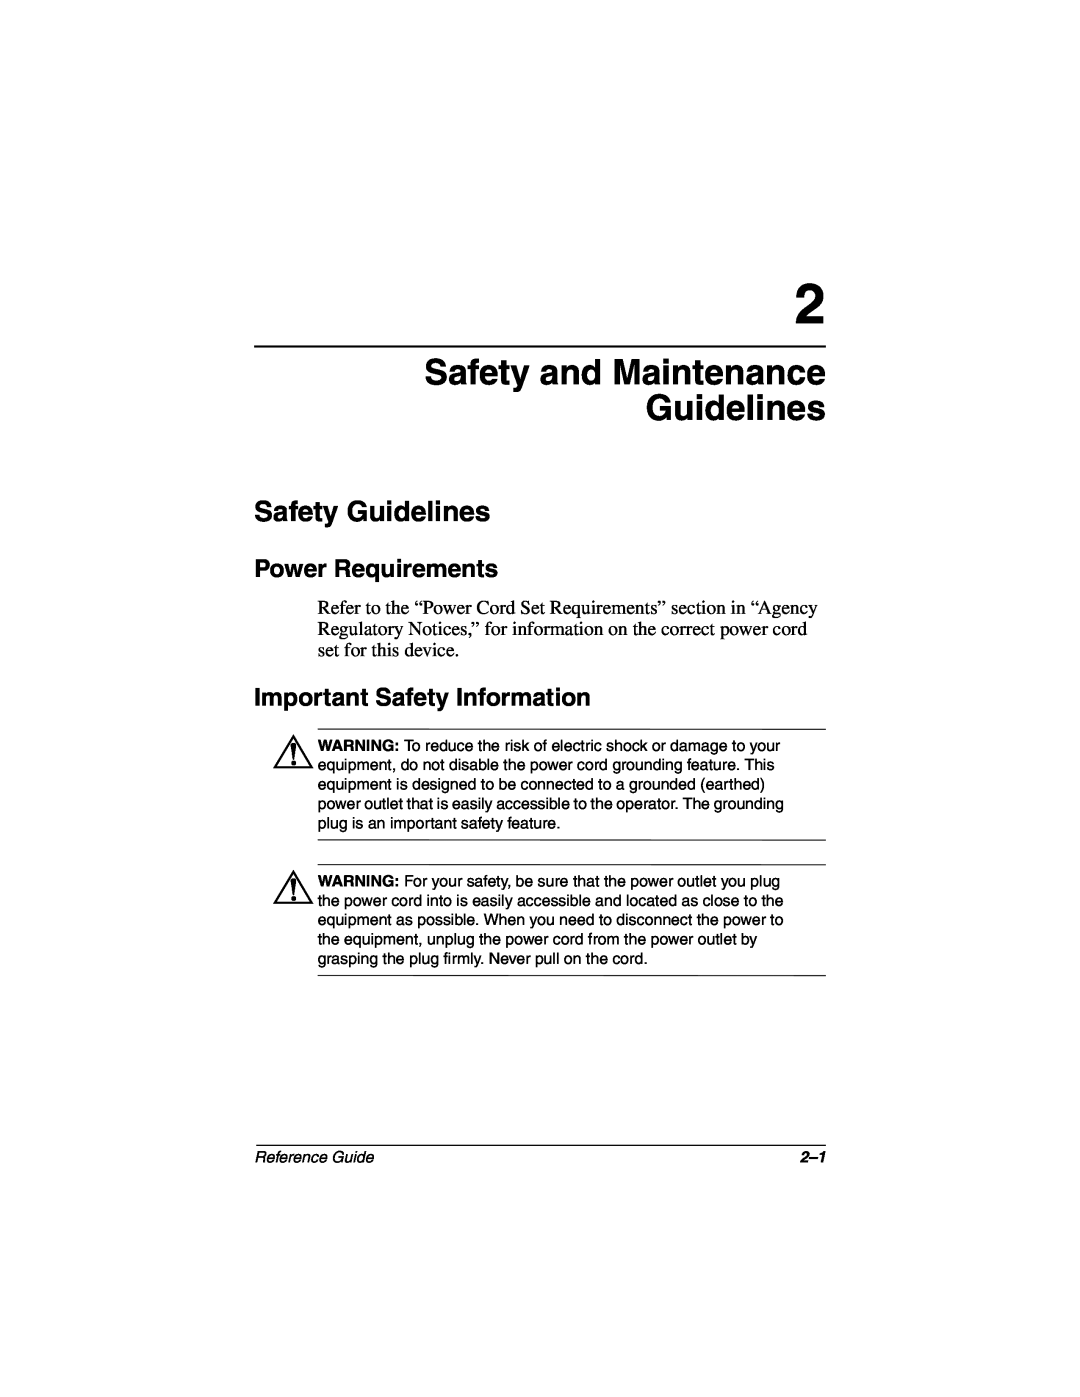 Compaq 5017 manual Safety and Maintenance Guidelines, Safety Guidelines, Power Requirements, Important Safety Information 